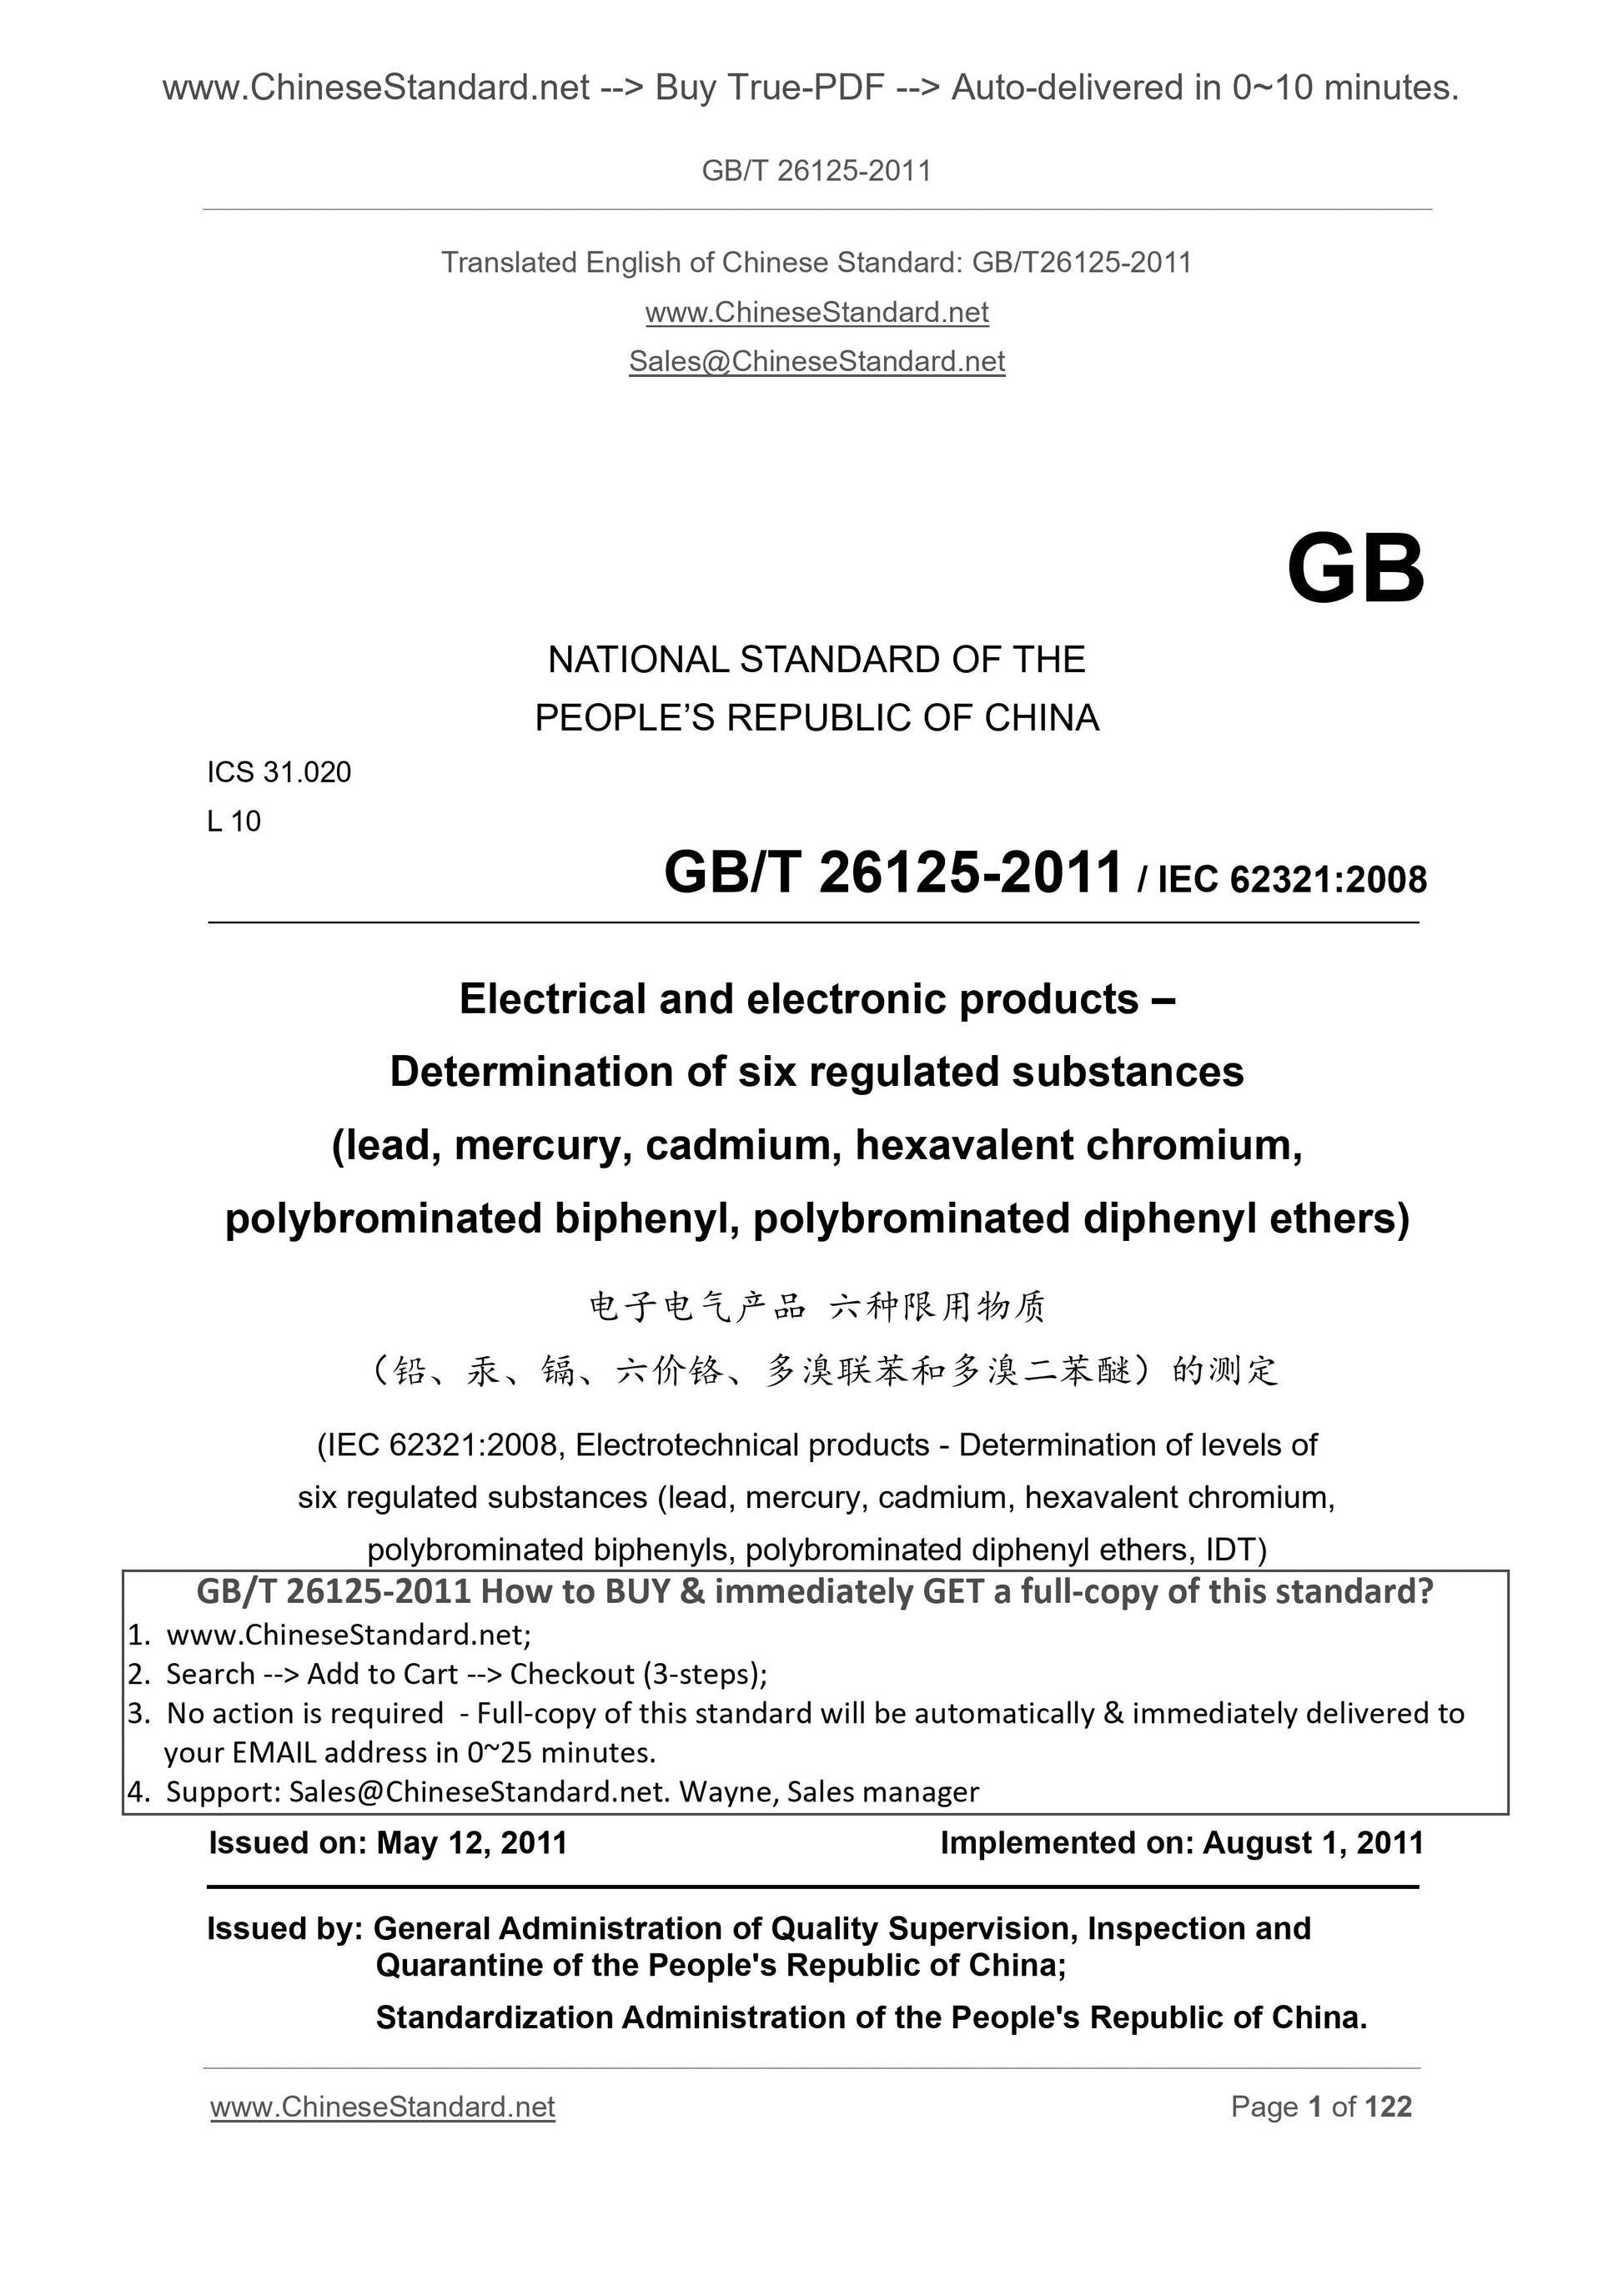 GB/T 26125-2011 Page 1